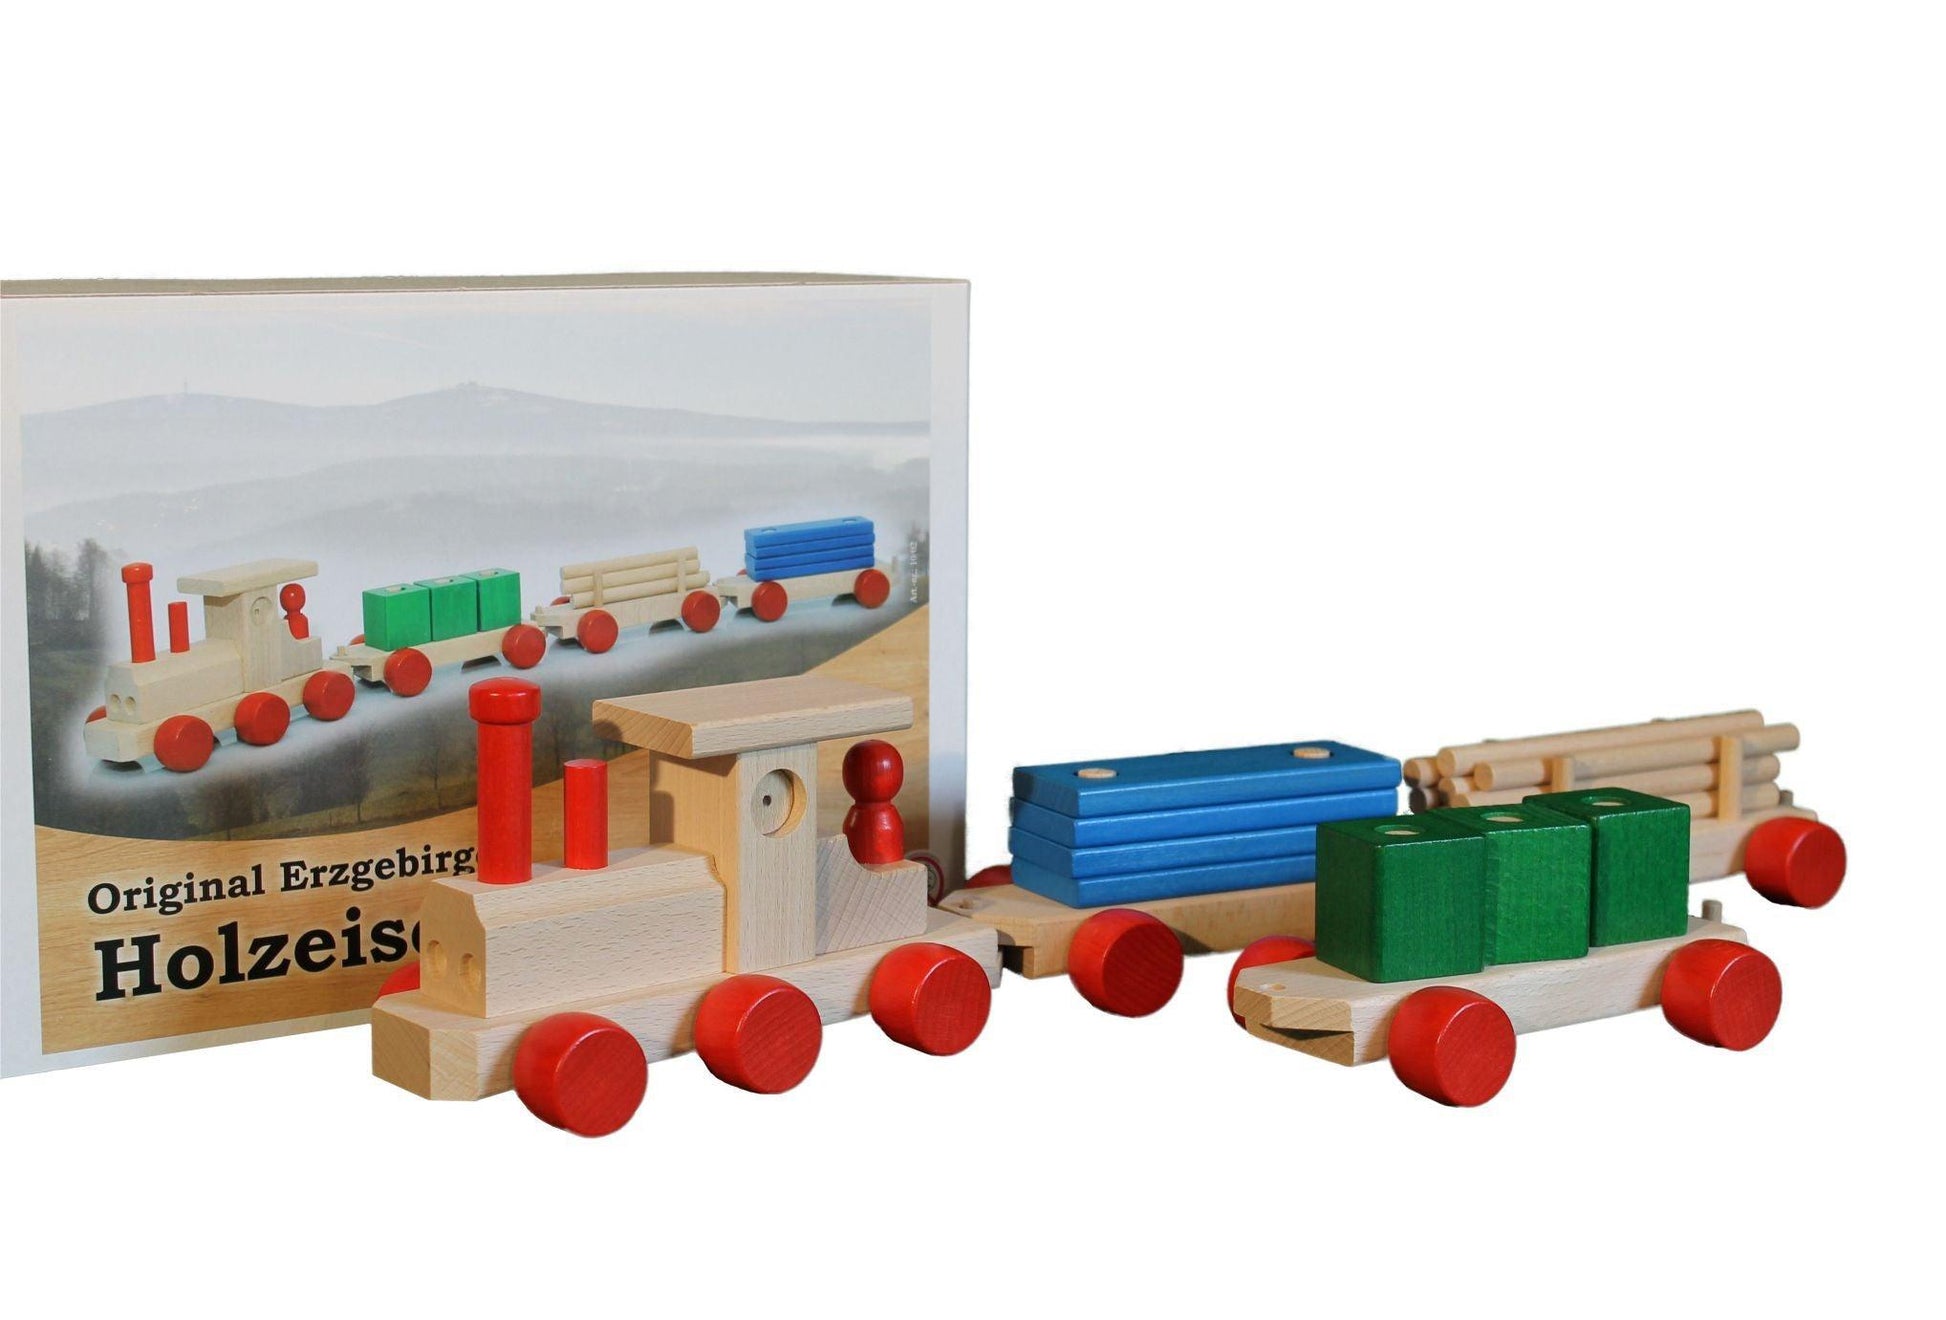 Large Wooden Toy Train Outside Packaging